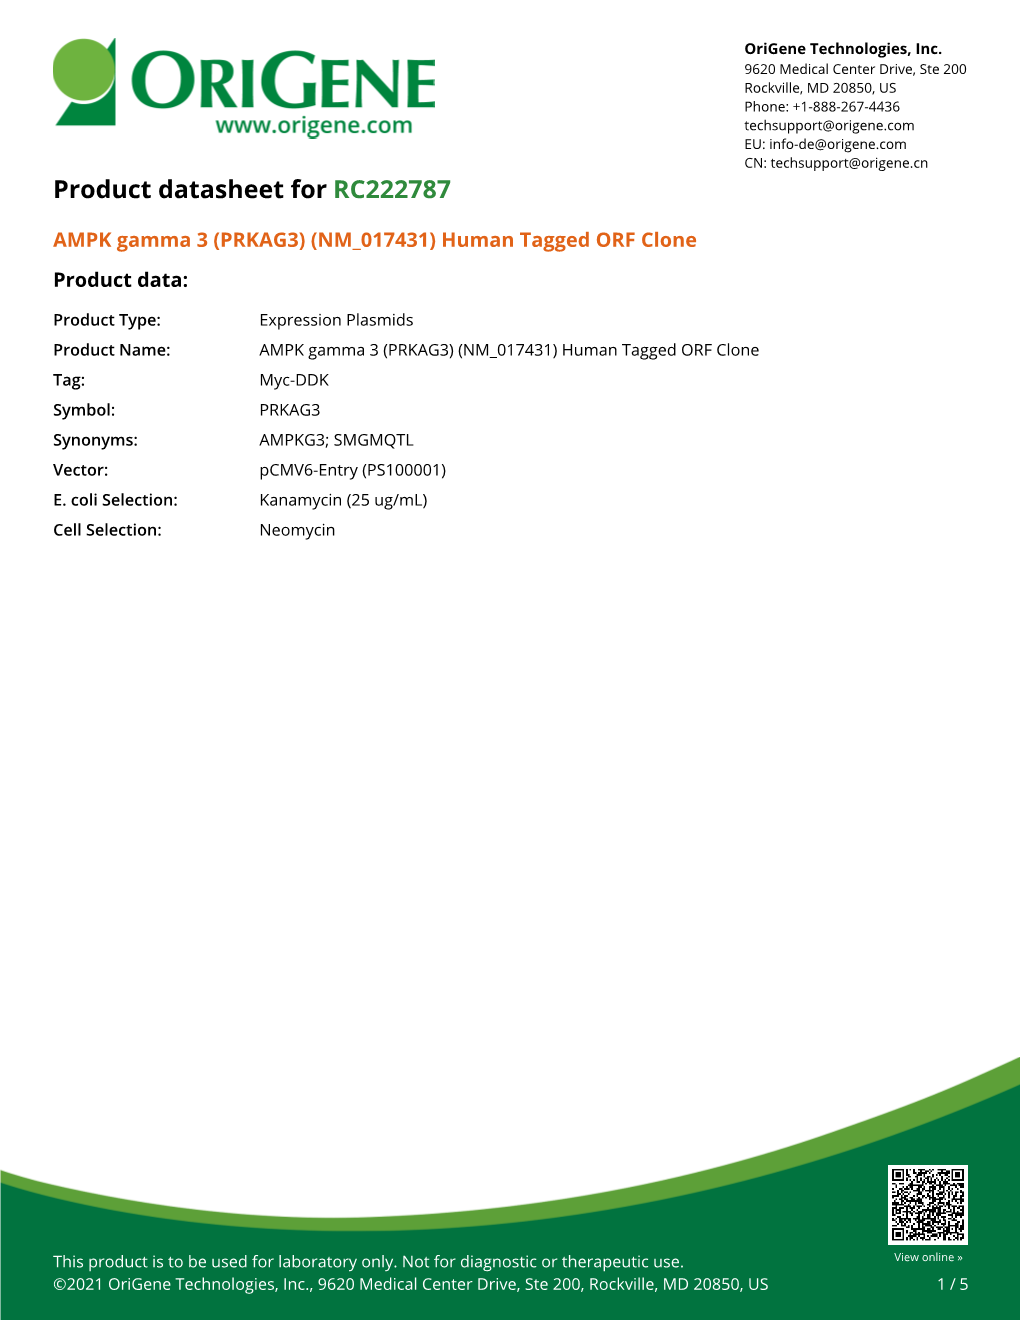 AMPK Gamma 3 (PRKAG3) (NM 017431) Human Tagged ORF Clone Product Data